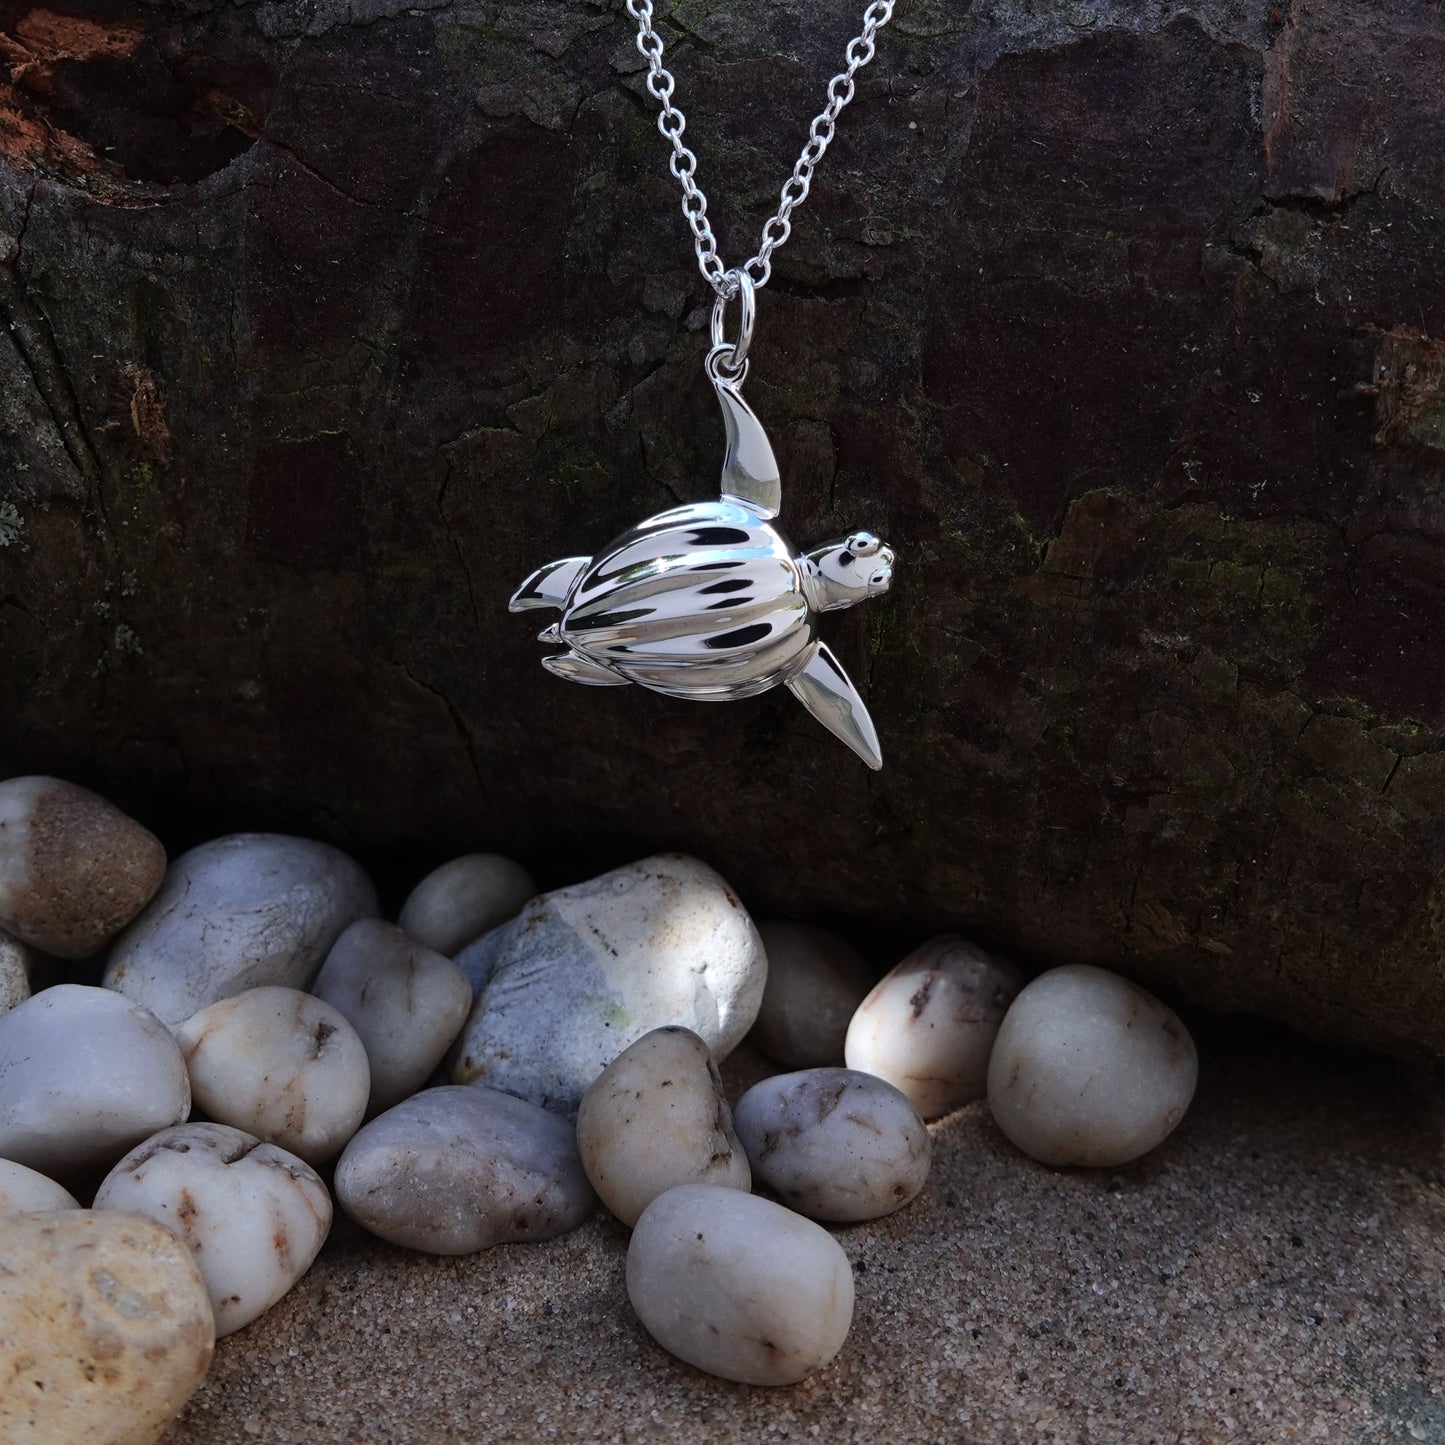 Sea Turtle necklace. Made from highly polished, tarnish resistant silver, hung on a solid silver chain. © Adrian Ashley